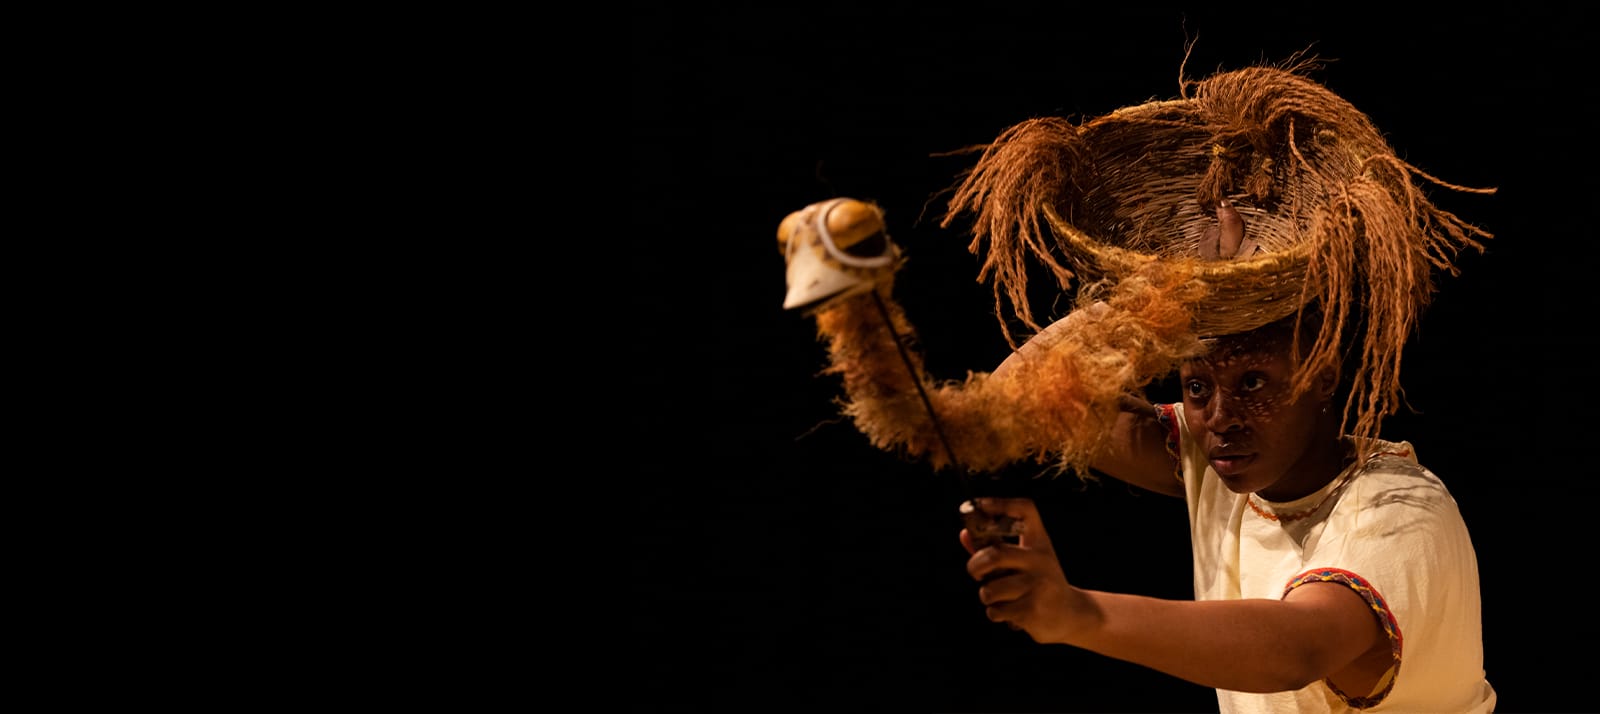 A woman wears a birds nest on her head and operates an emu puppet